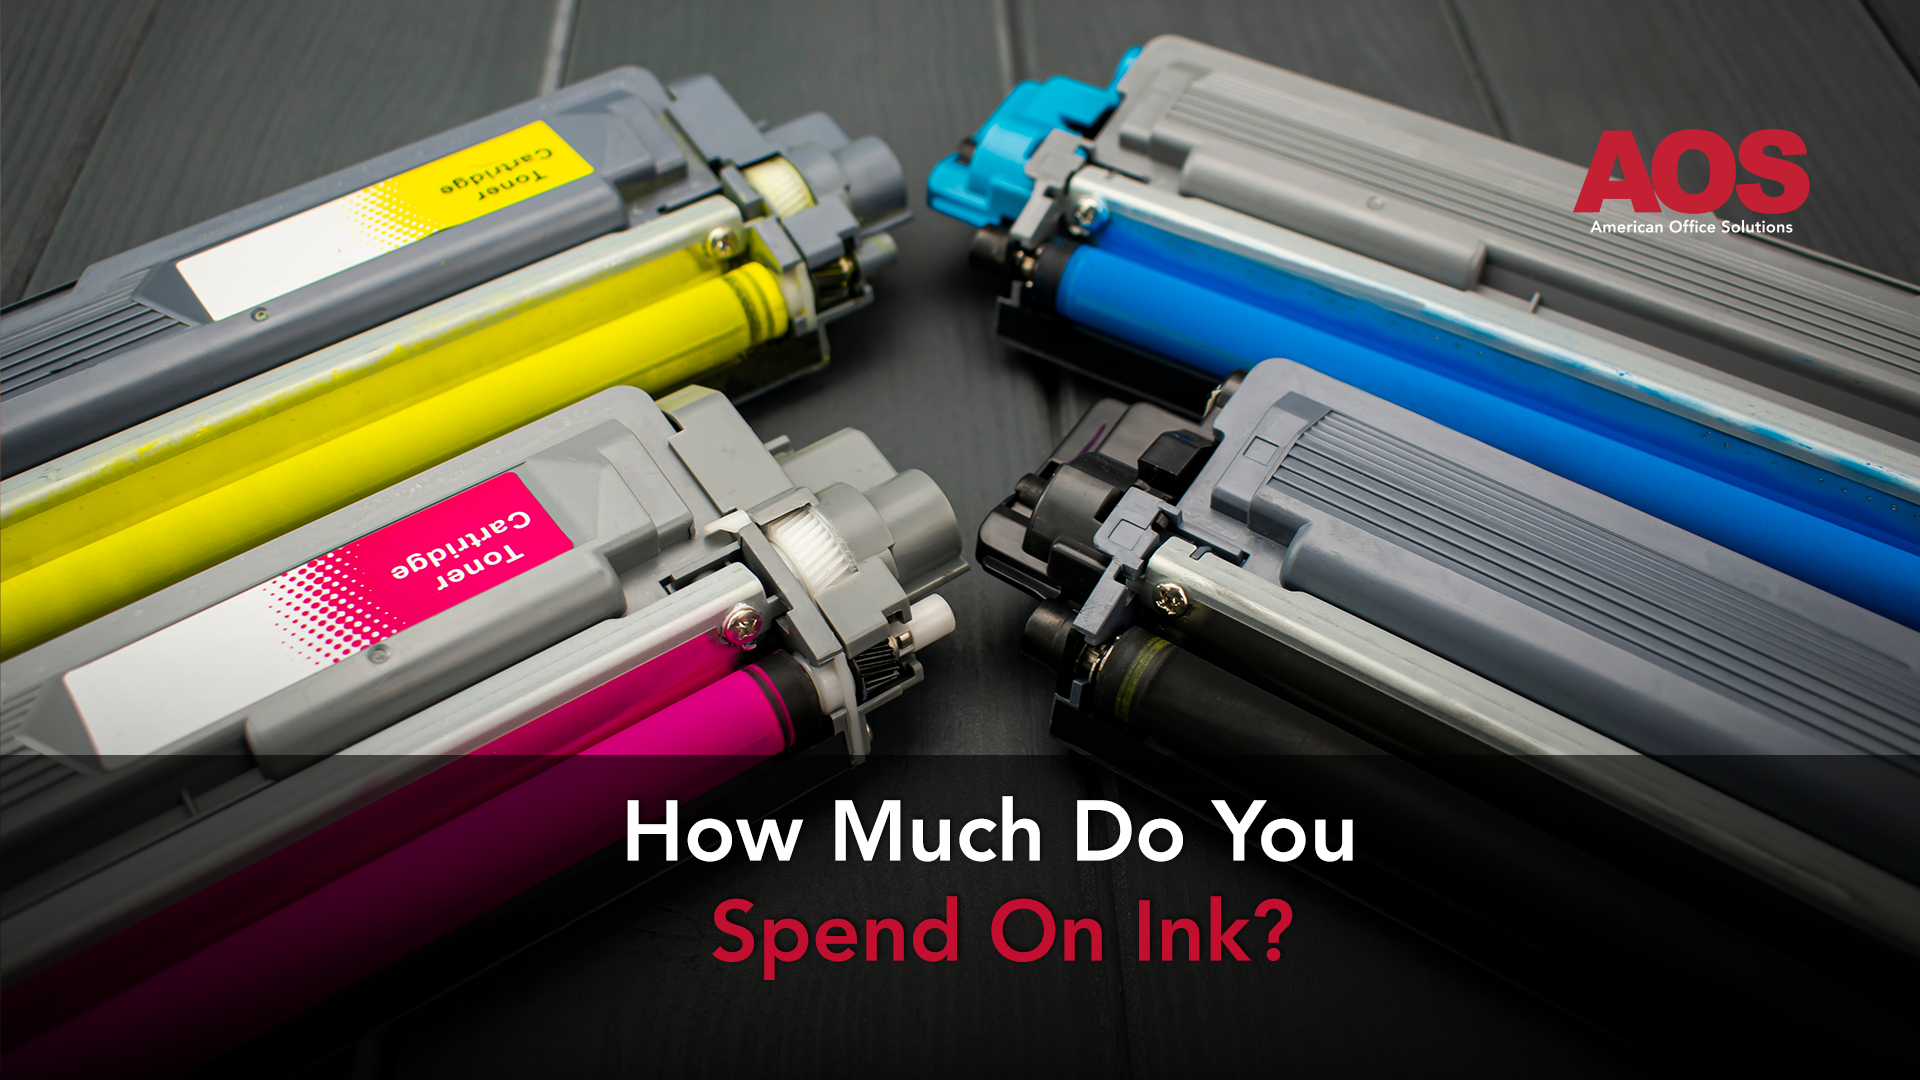 Spend on Ink